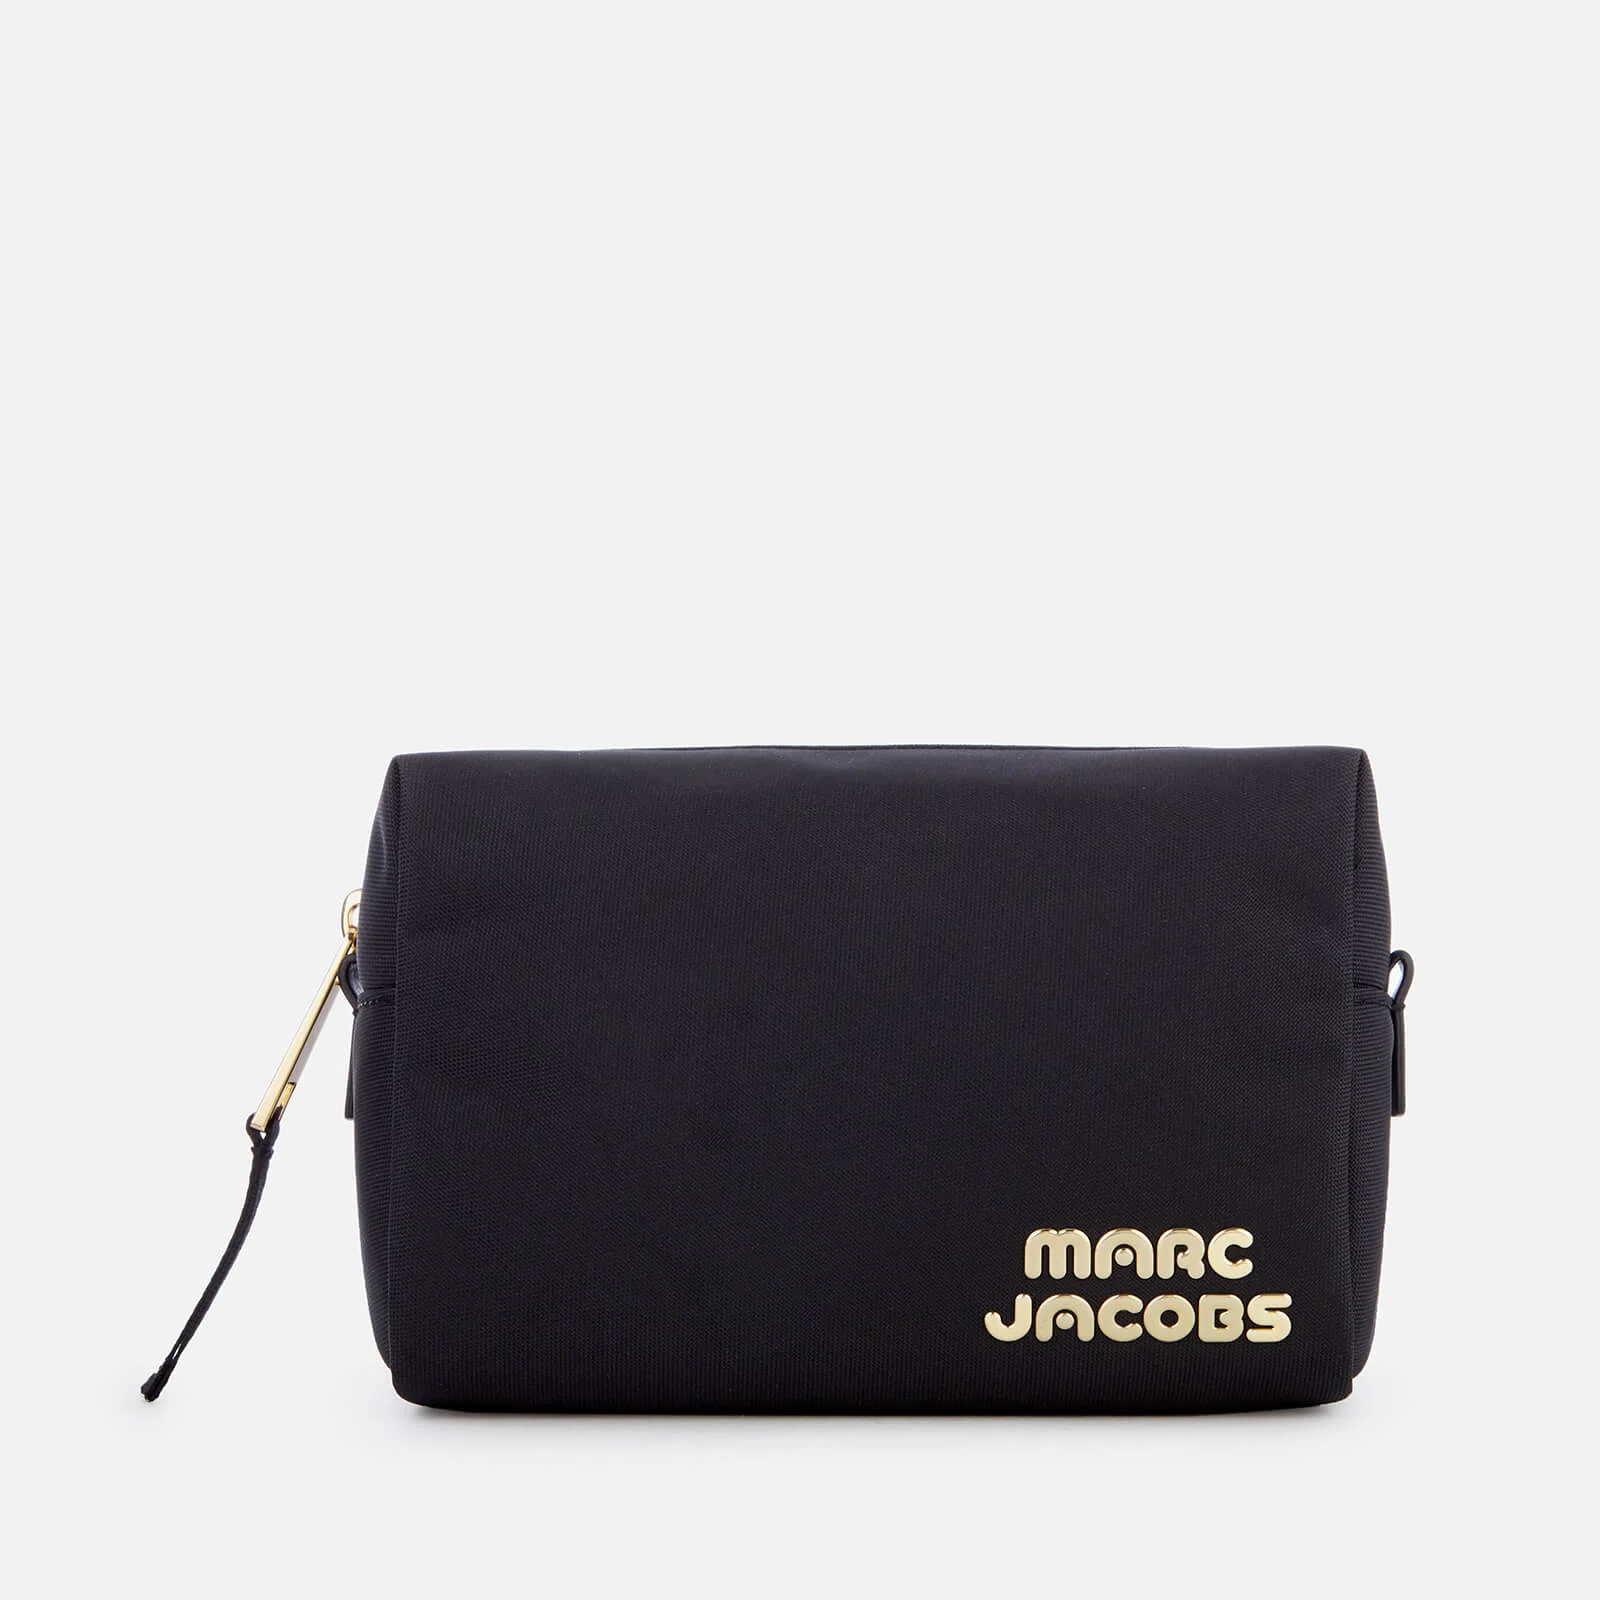 Marc Jacobs Women's Large Cosmetic Bag - Black Image 1